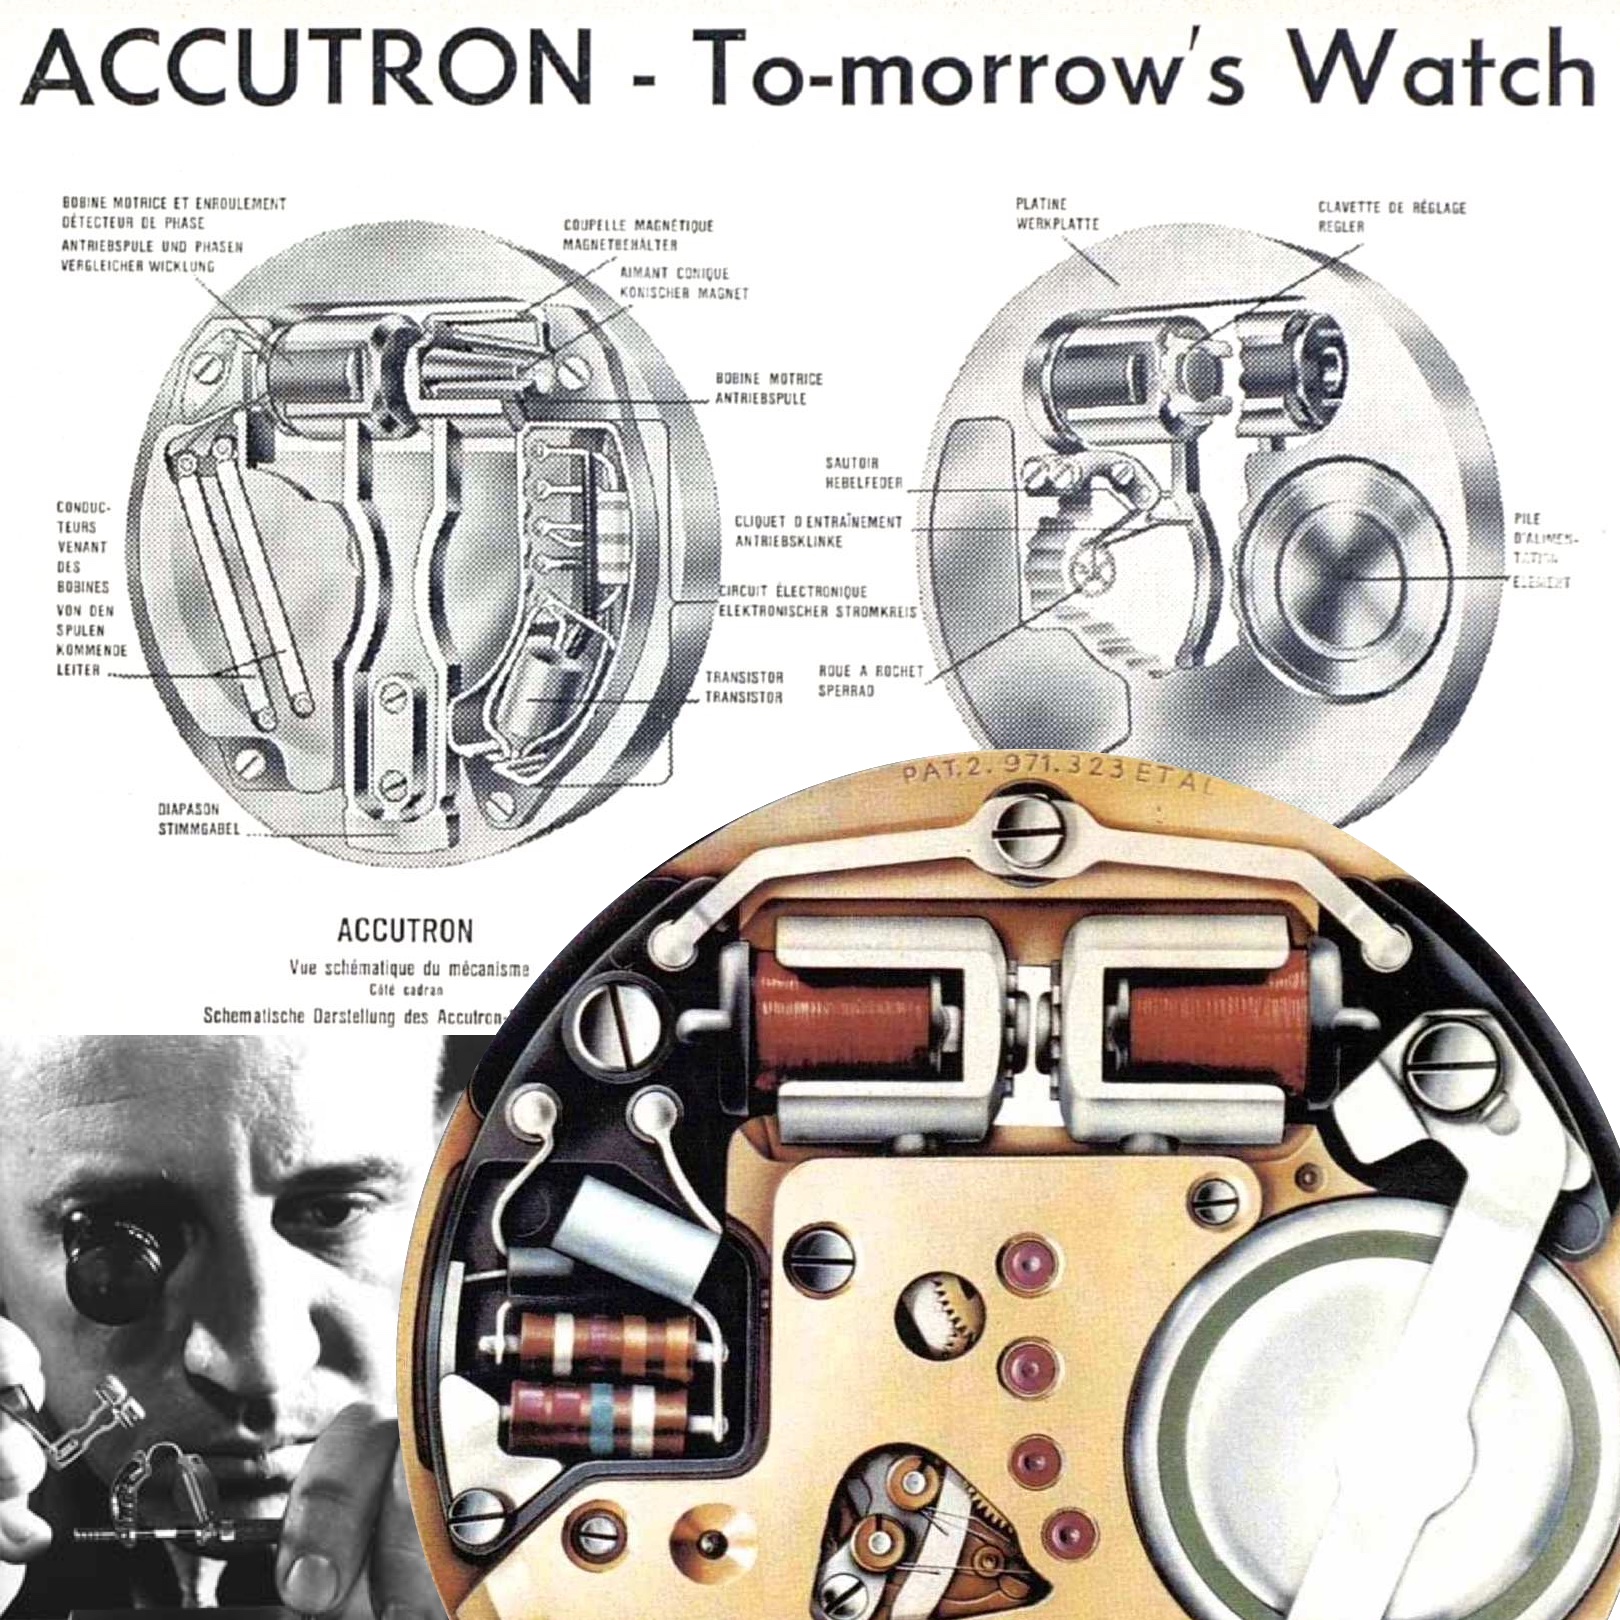 Bulova Accutron, the Watch of the 1960s - Grail Watch